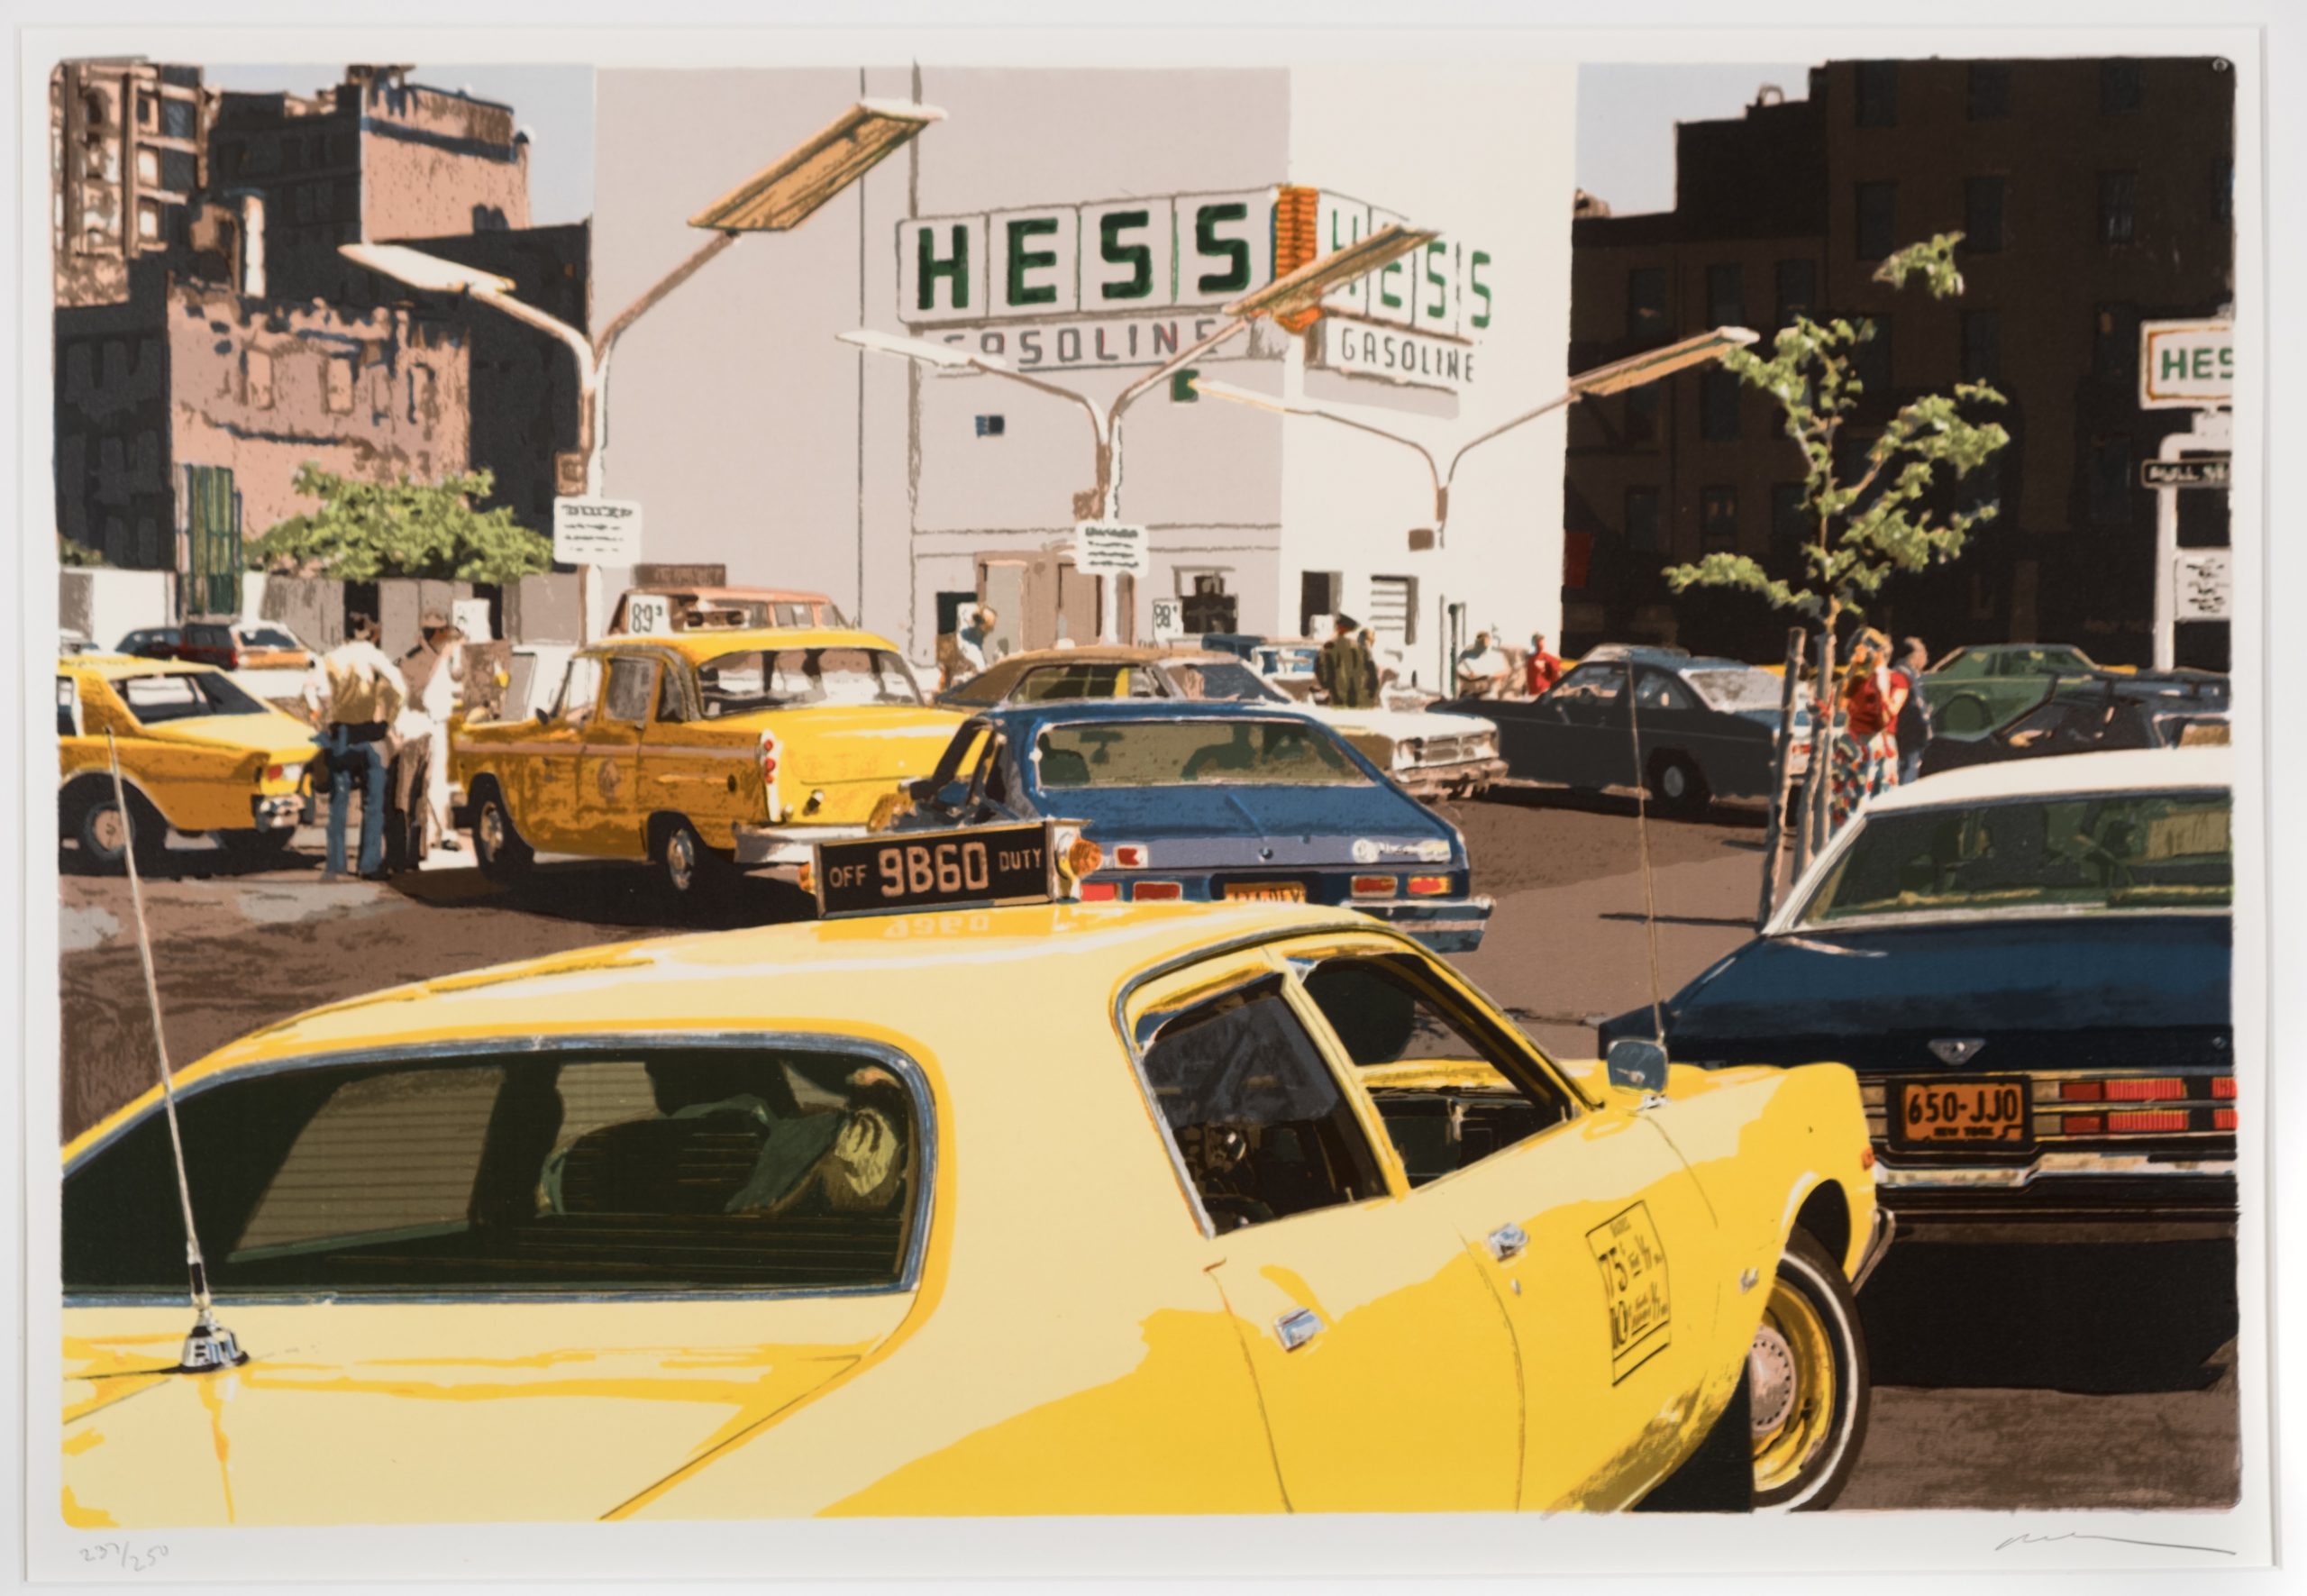 "Gas Line, from the portfolio of CITY-SCAPES by Ron Kleemann